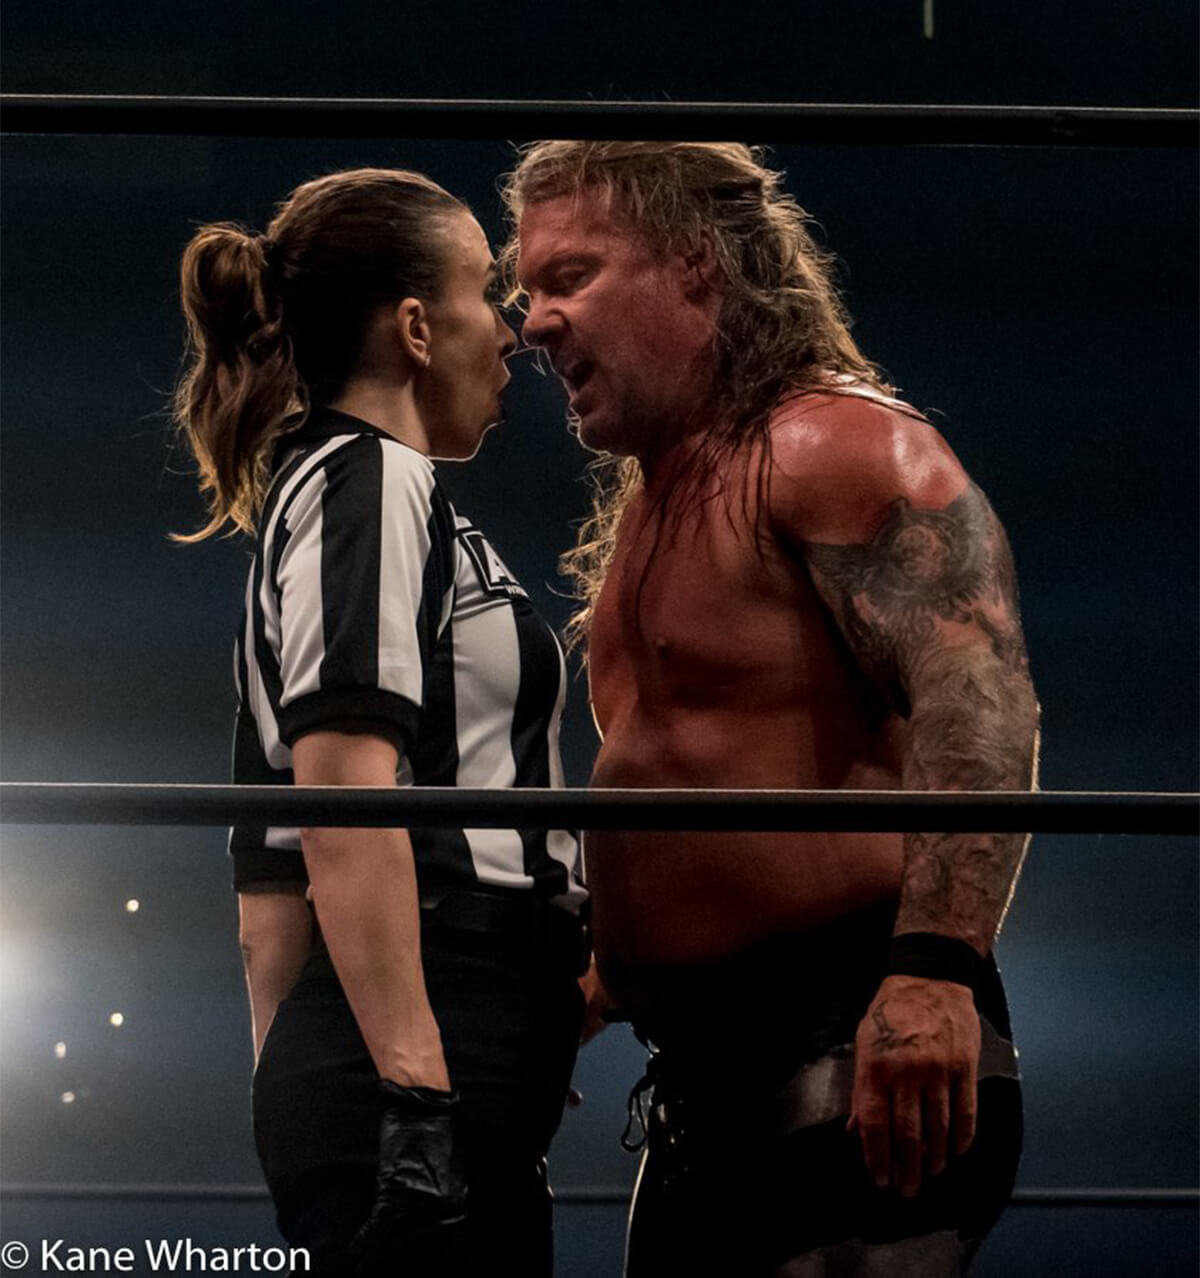 Referee Aubrey Edwards and wrestler Chris Jericho get in each other’s faces during an argument in the ring.